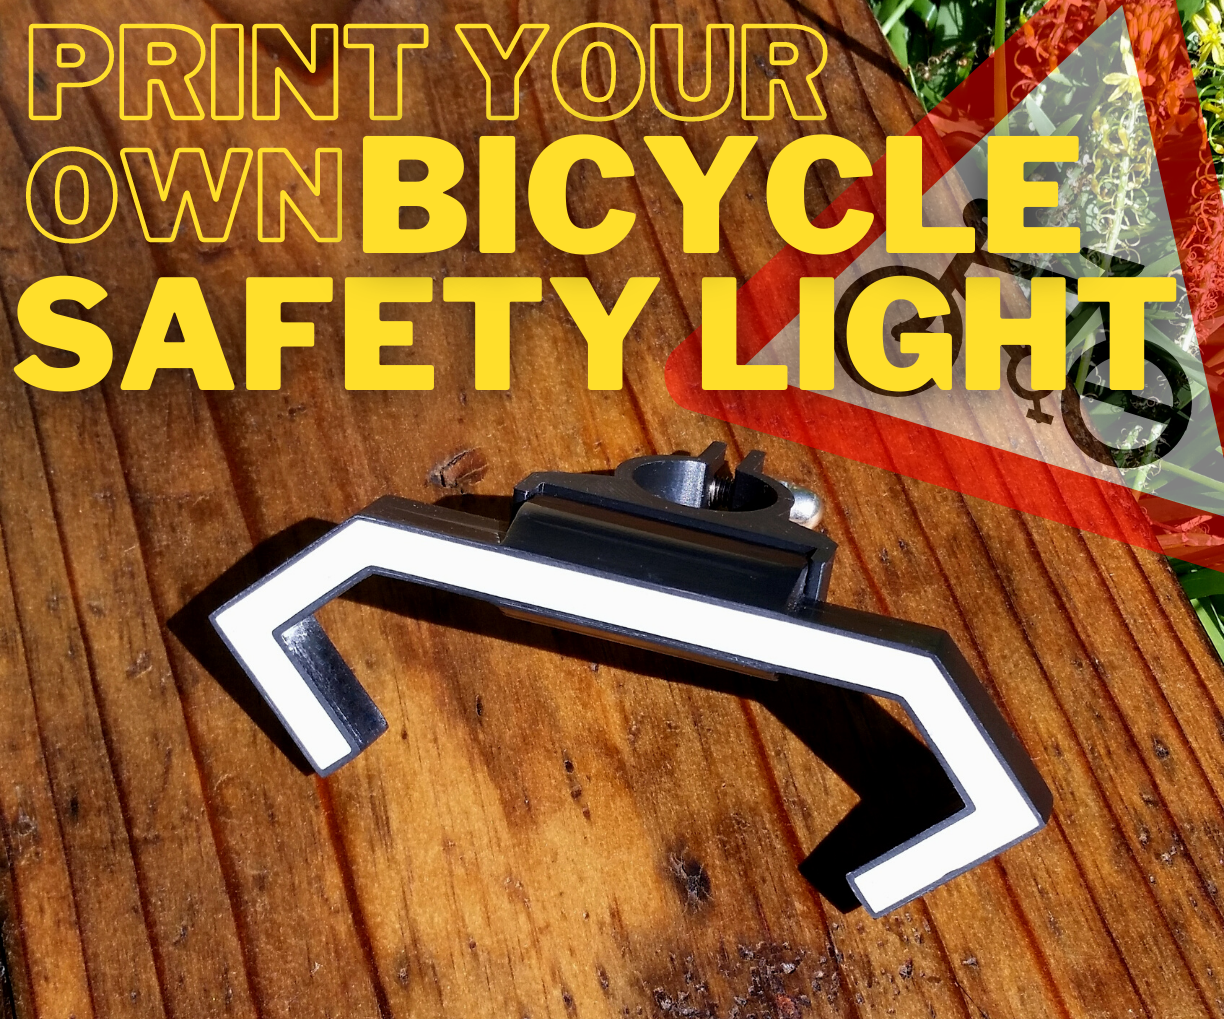 3D Print Your Own Bicycle Safety Light